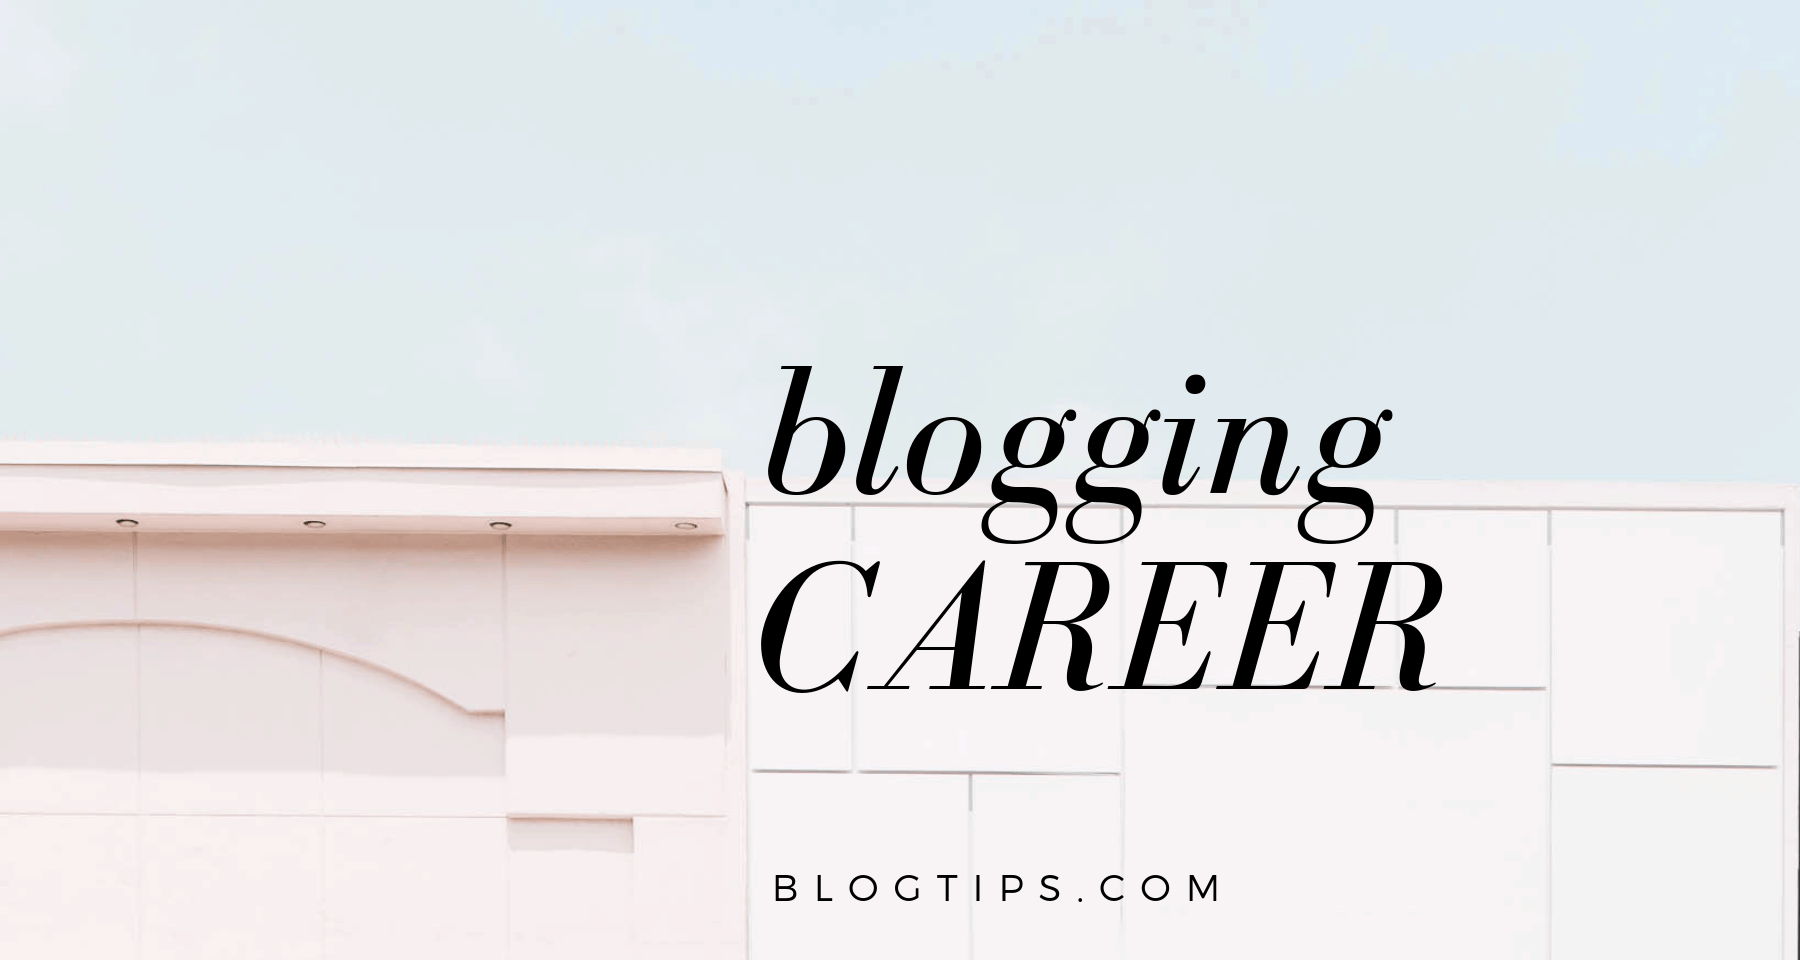 Your blogging career can be a reality